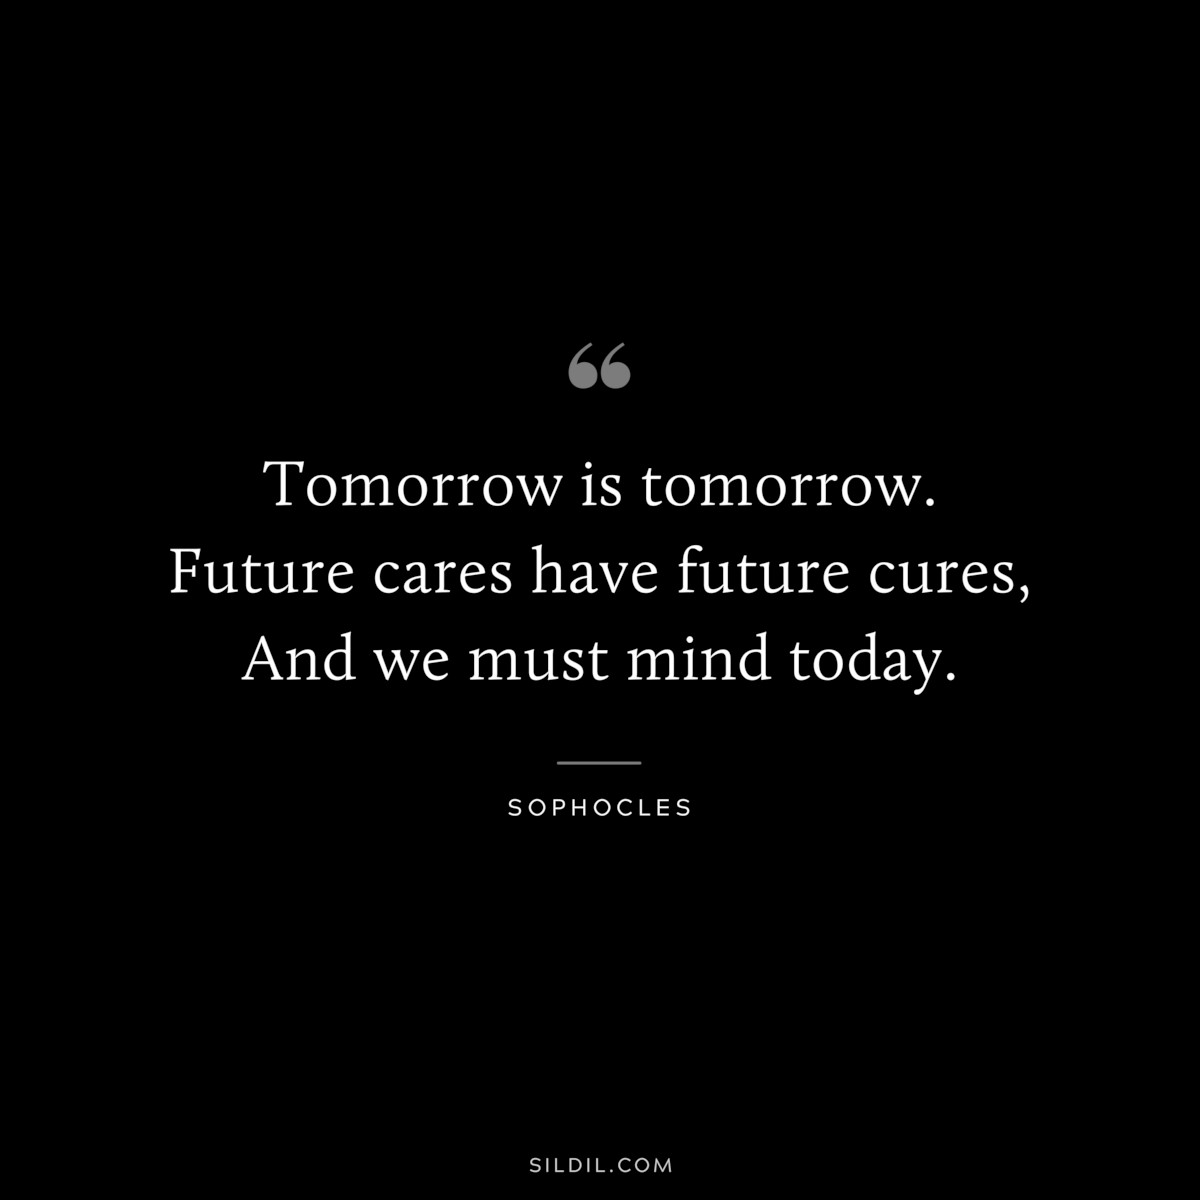 Tomorrow is tomorrow. Future cares have future cures, And we must mind today. ― Sophocles